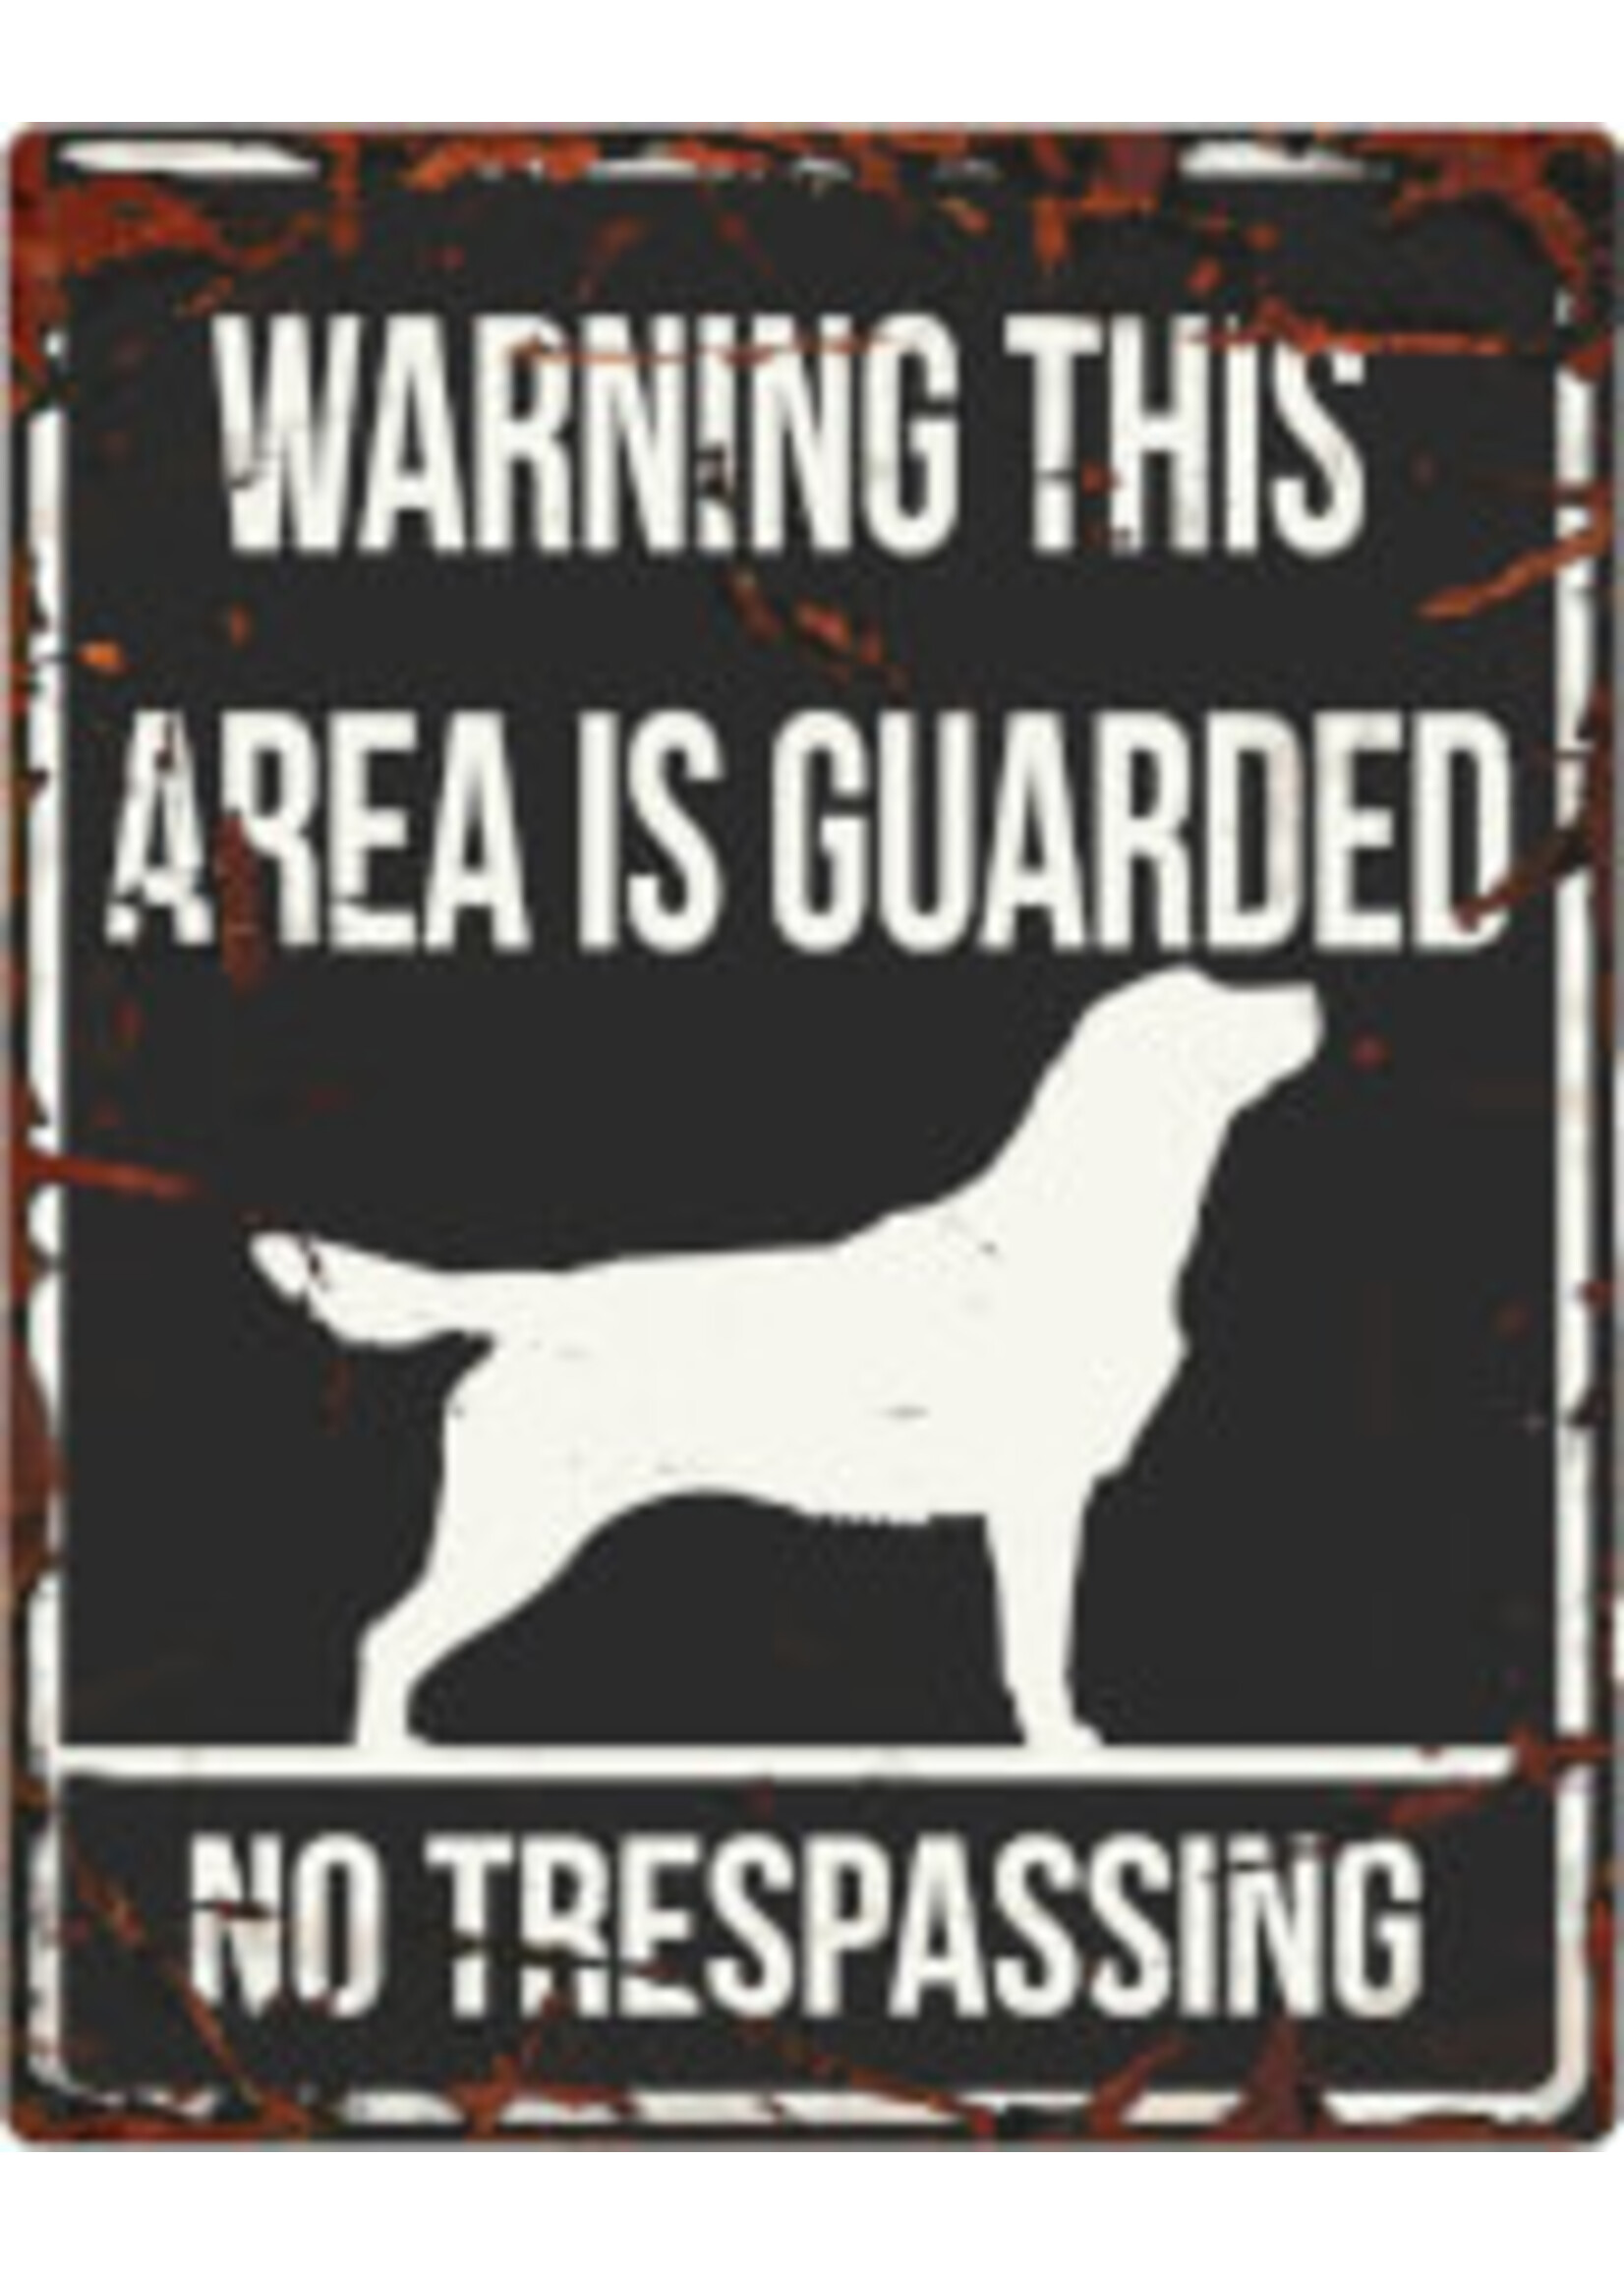 D&D Home Collection Warning Sign Square